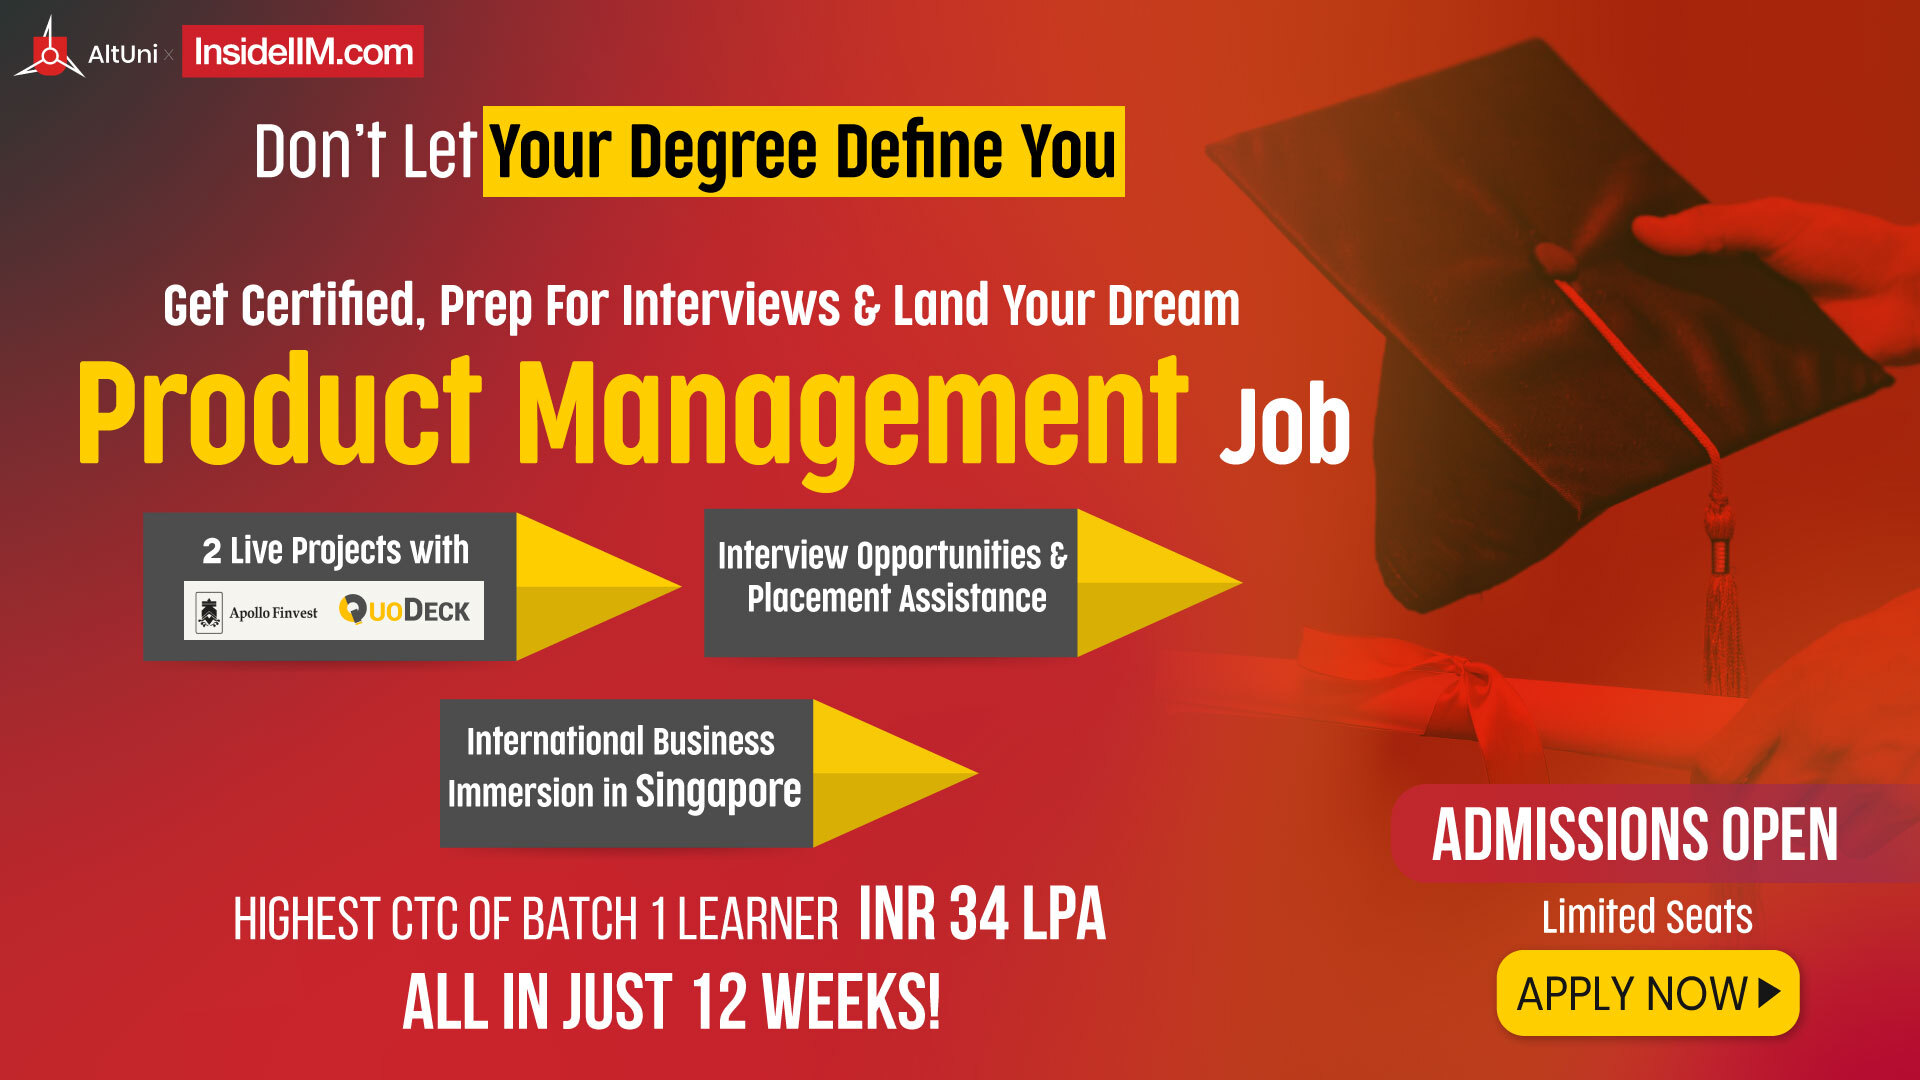 Become A Certified Product Manager! Check Out AltUni's Certificate Program In Product Management